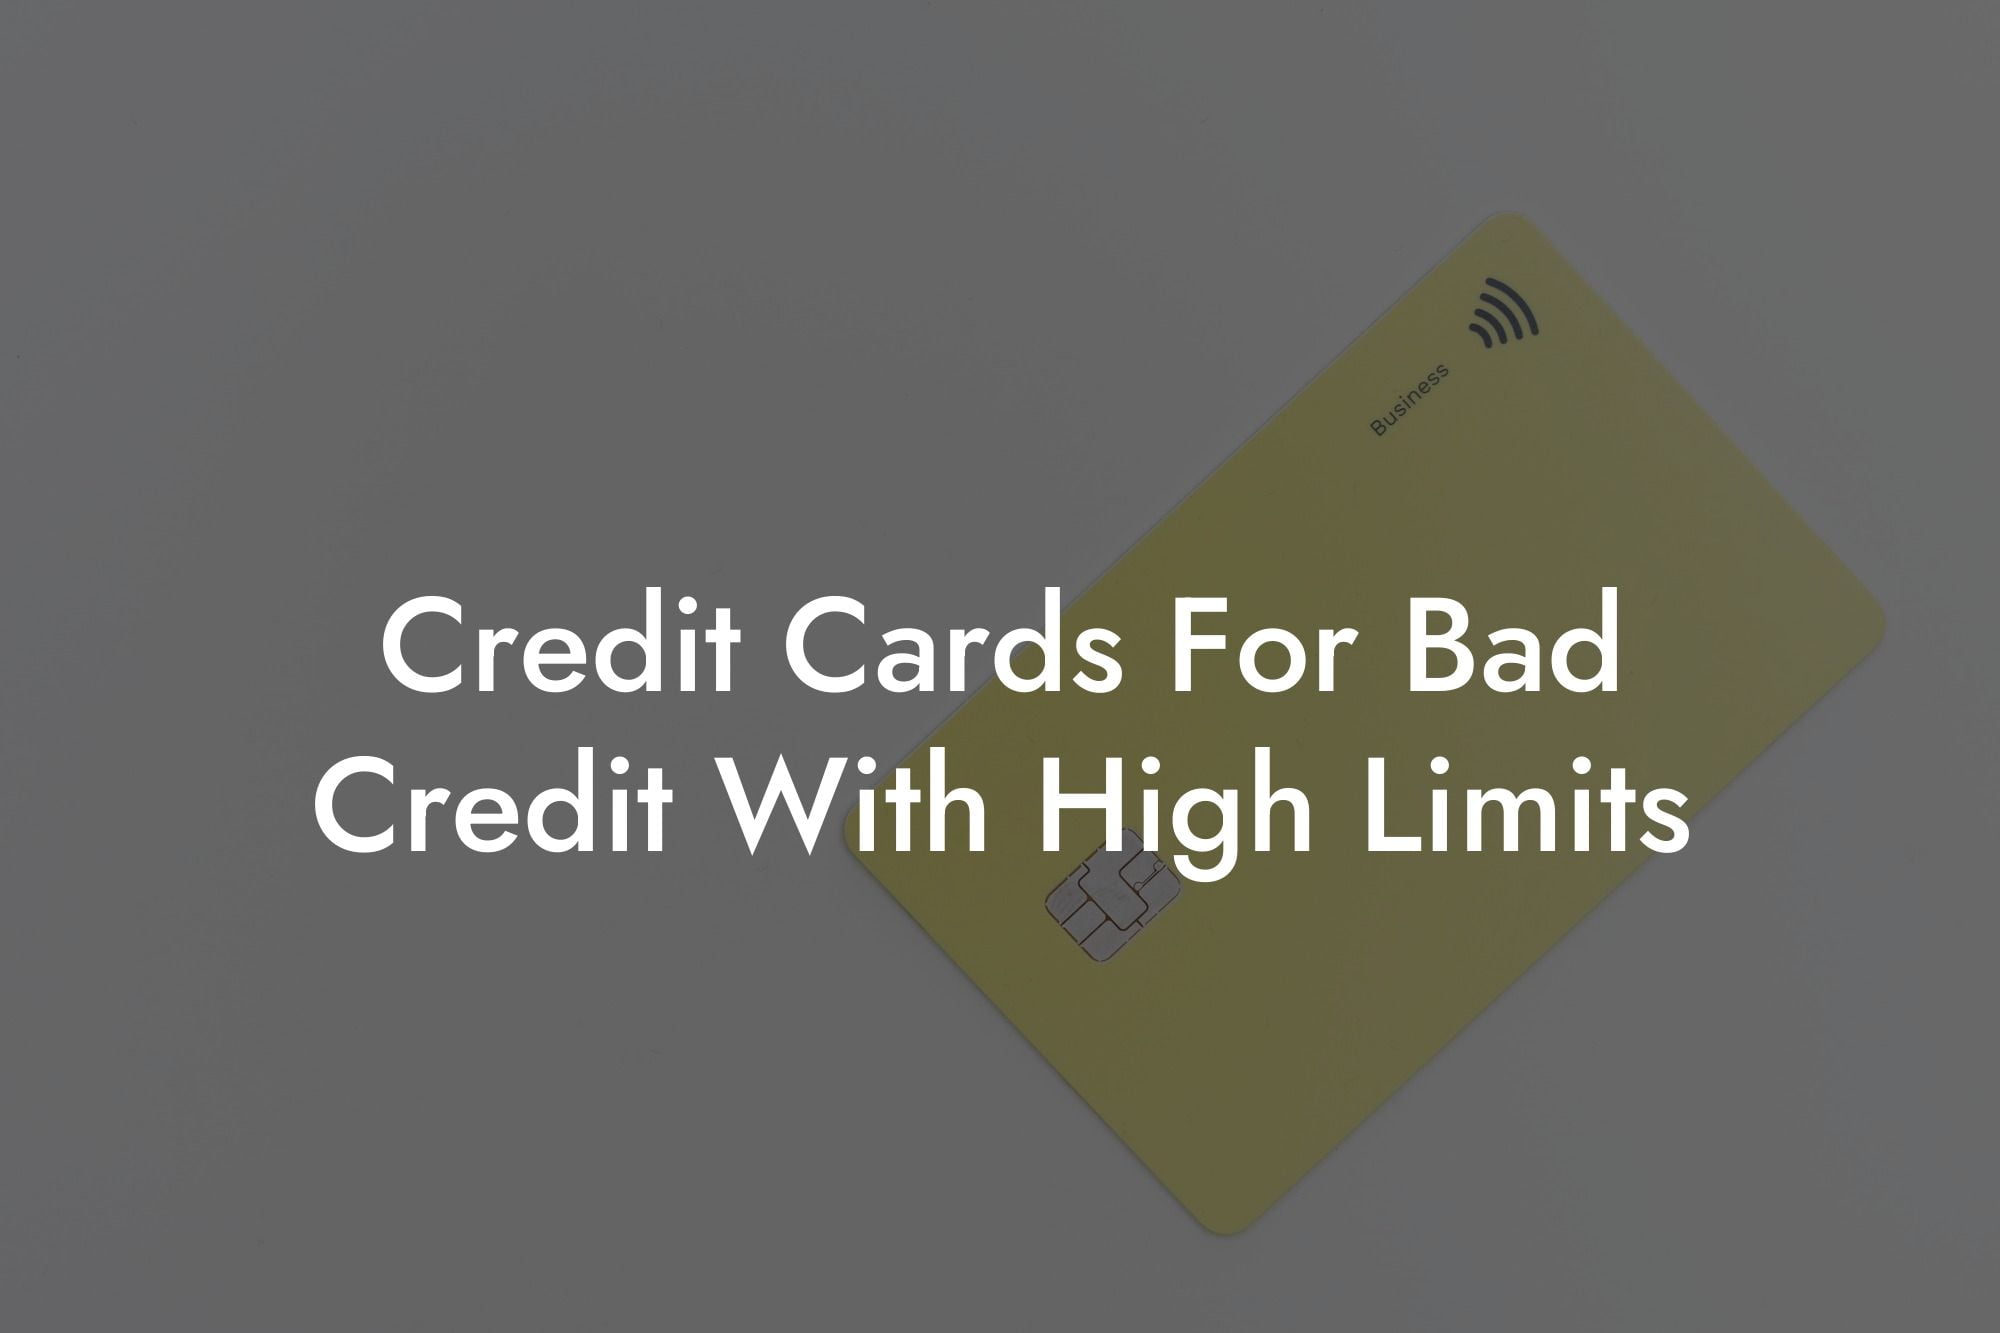 Credit Cards For Bad Credit With High Limits